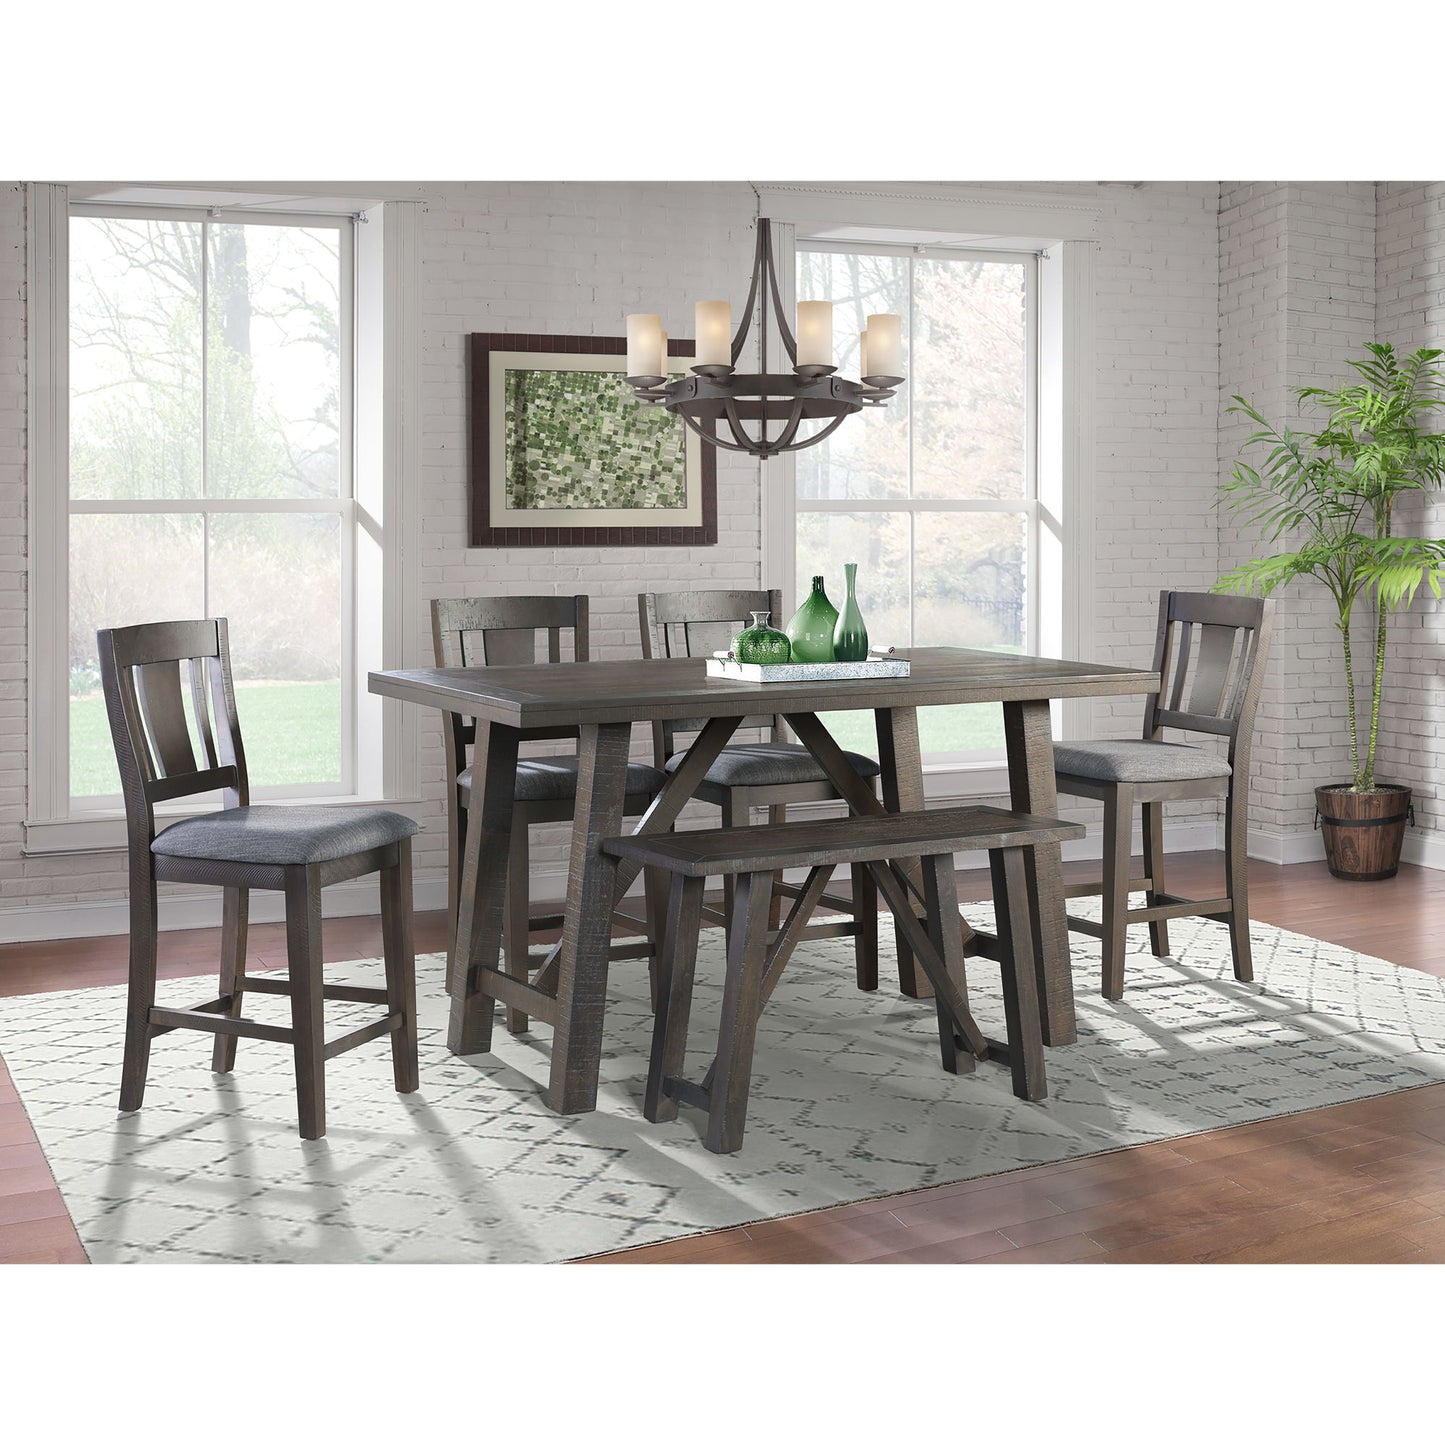 Cash - Counter Height Dining Set